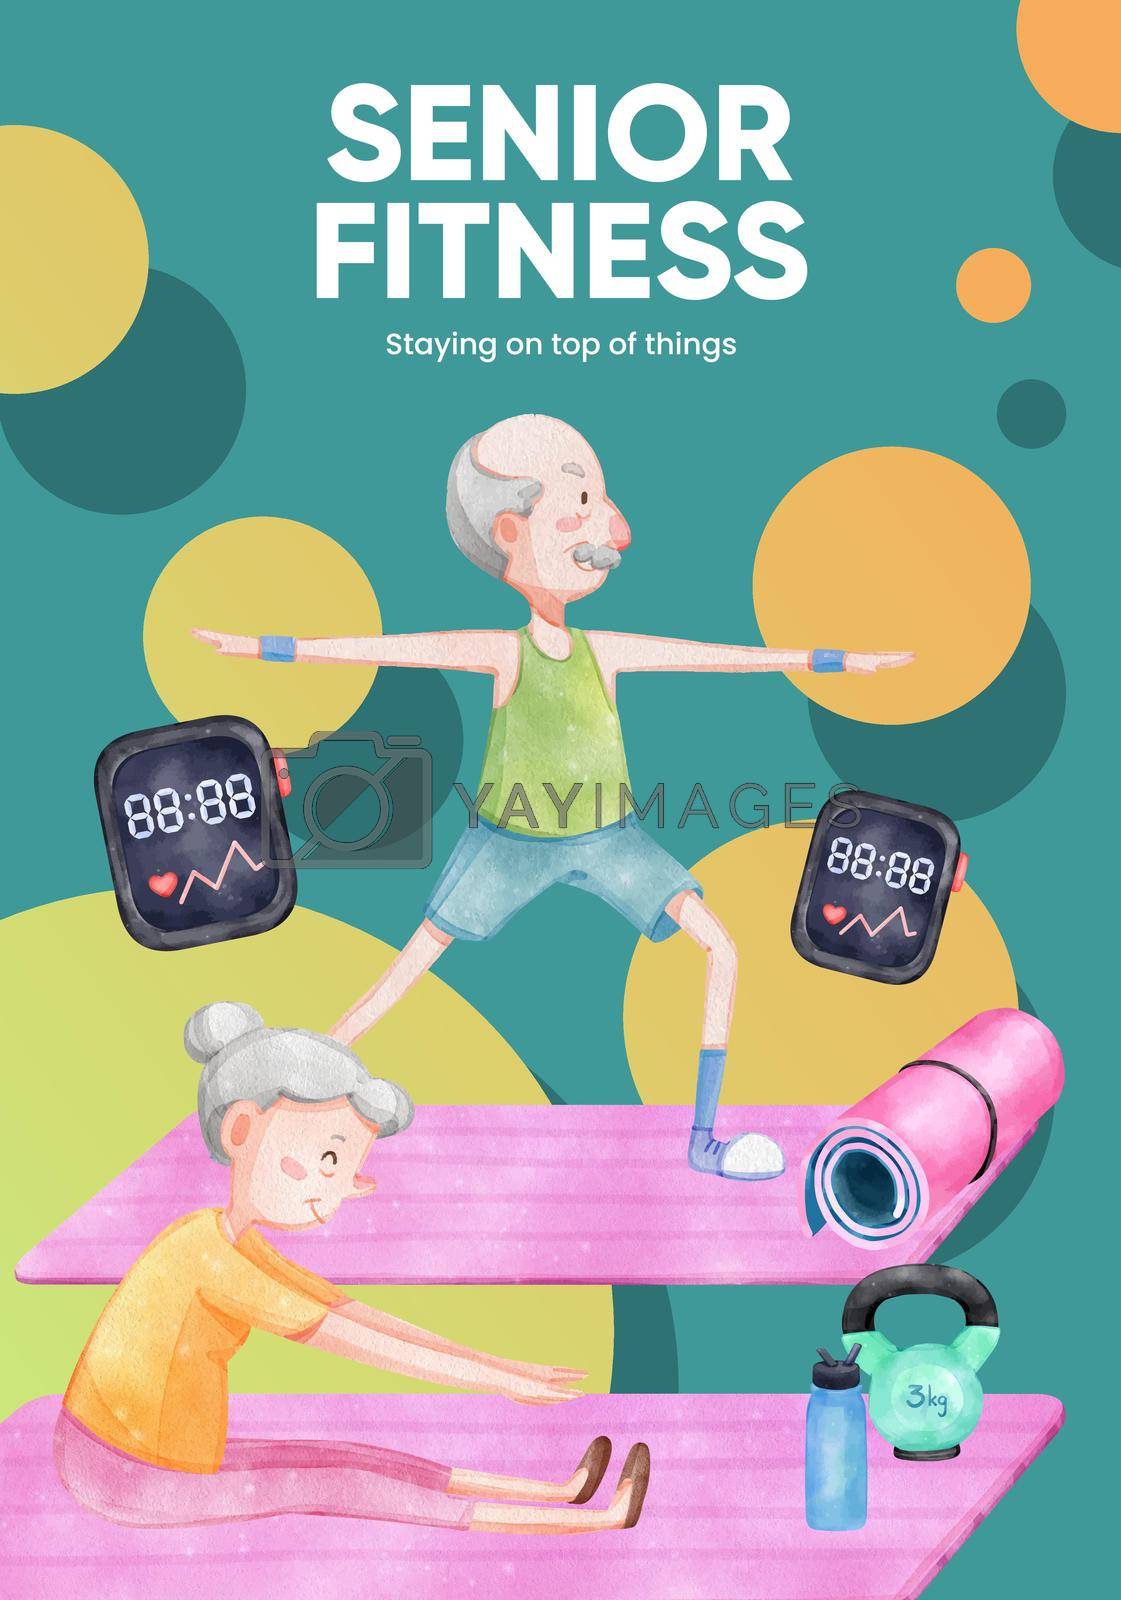 Poster template with senior health fitness concept,watercolor style
